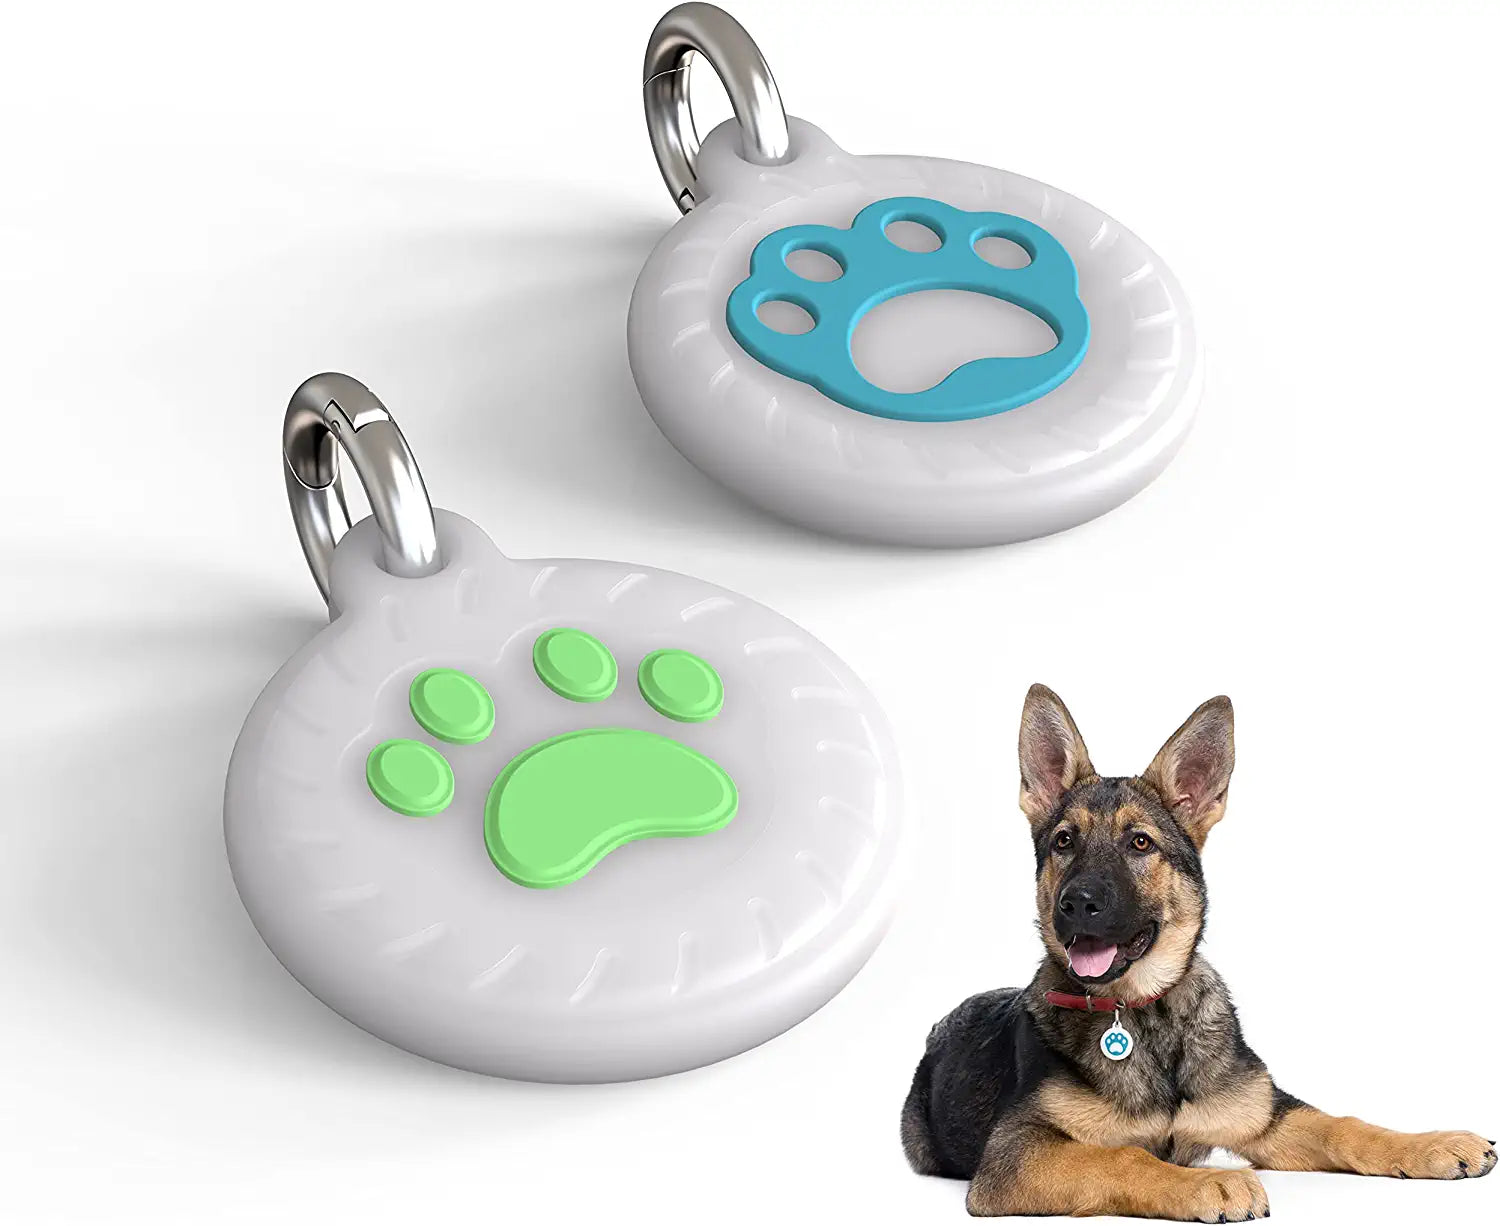 Owxix Apple Airtag Cases Airtag Keychain Holder for Dog/Cat ,Anti-Scratch Skin Cover&Water Resistant Silicone Protective Case for Airtag GPS Tracking with Keychain(2 Pack)